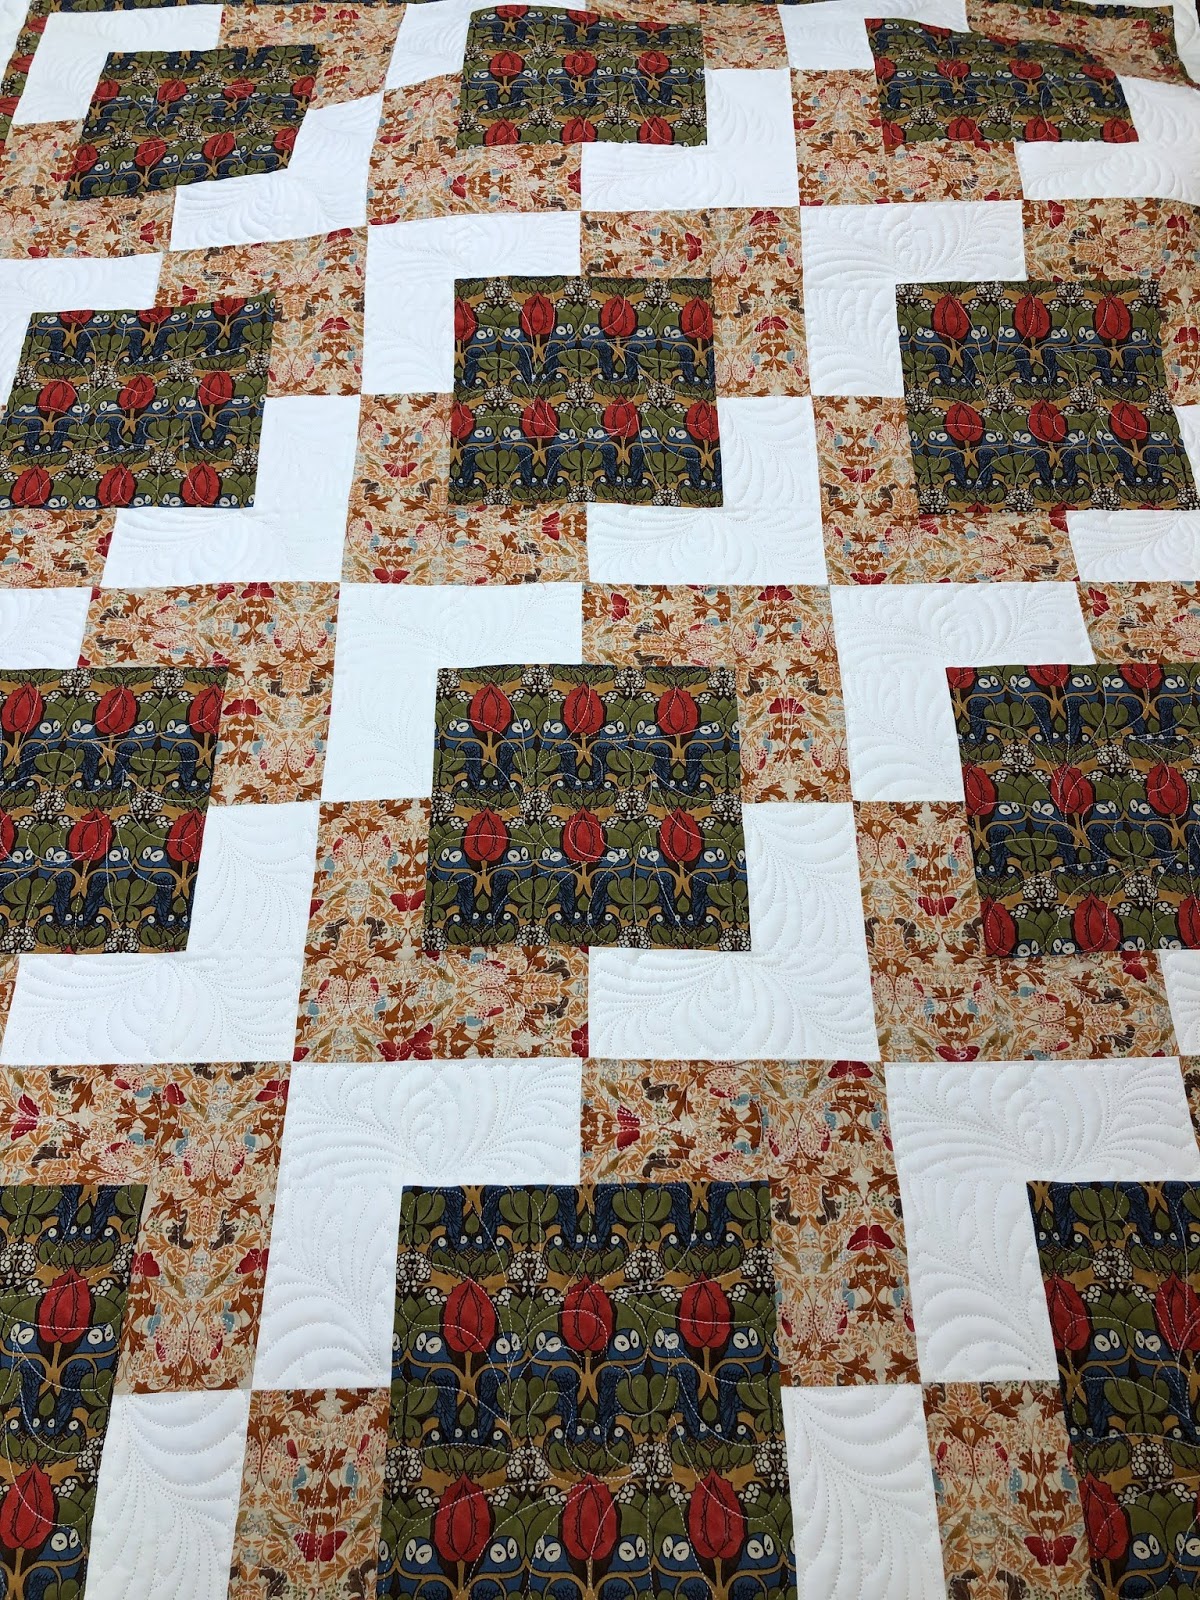 downloadable-stepping-stones-quilt-pattern-easy-3-yard-design-easy